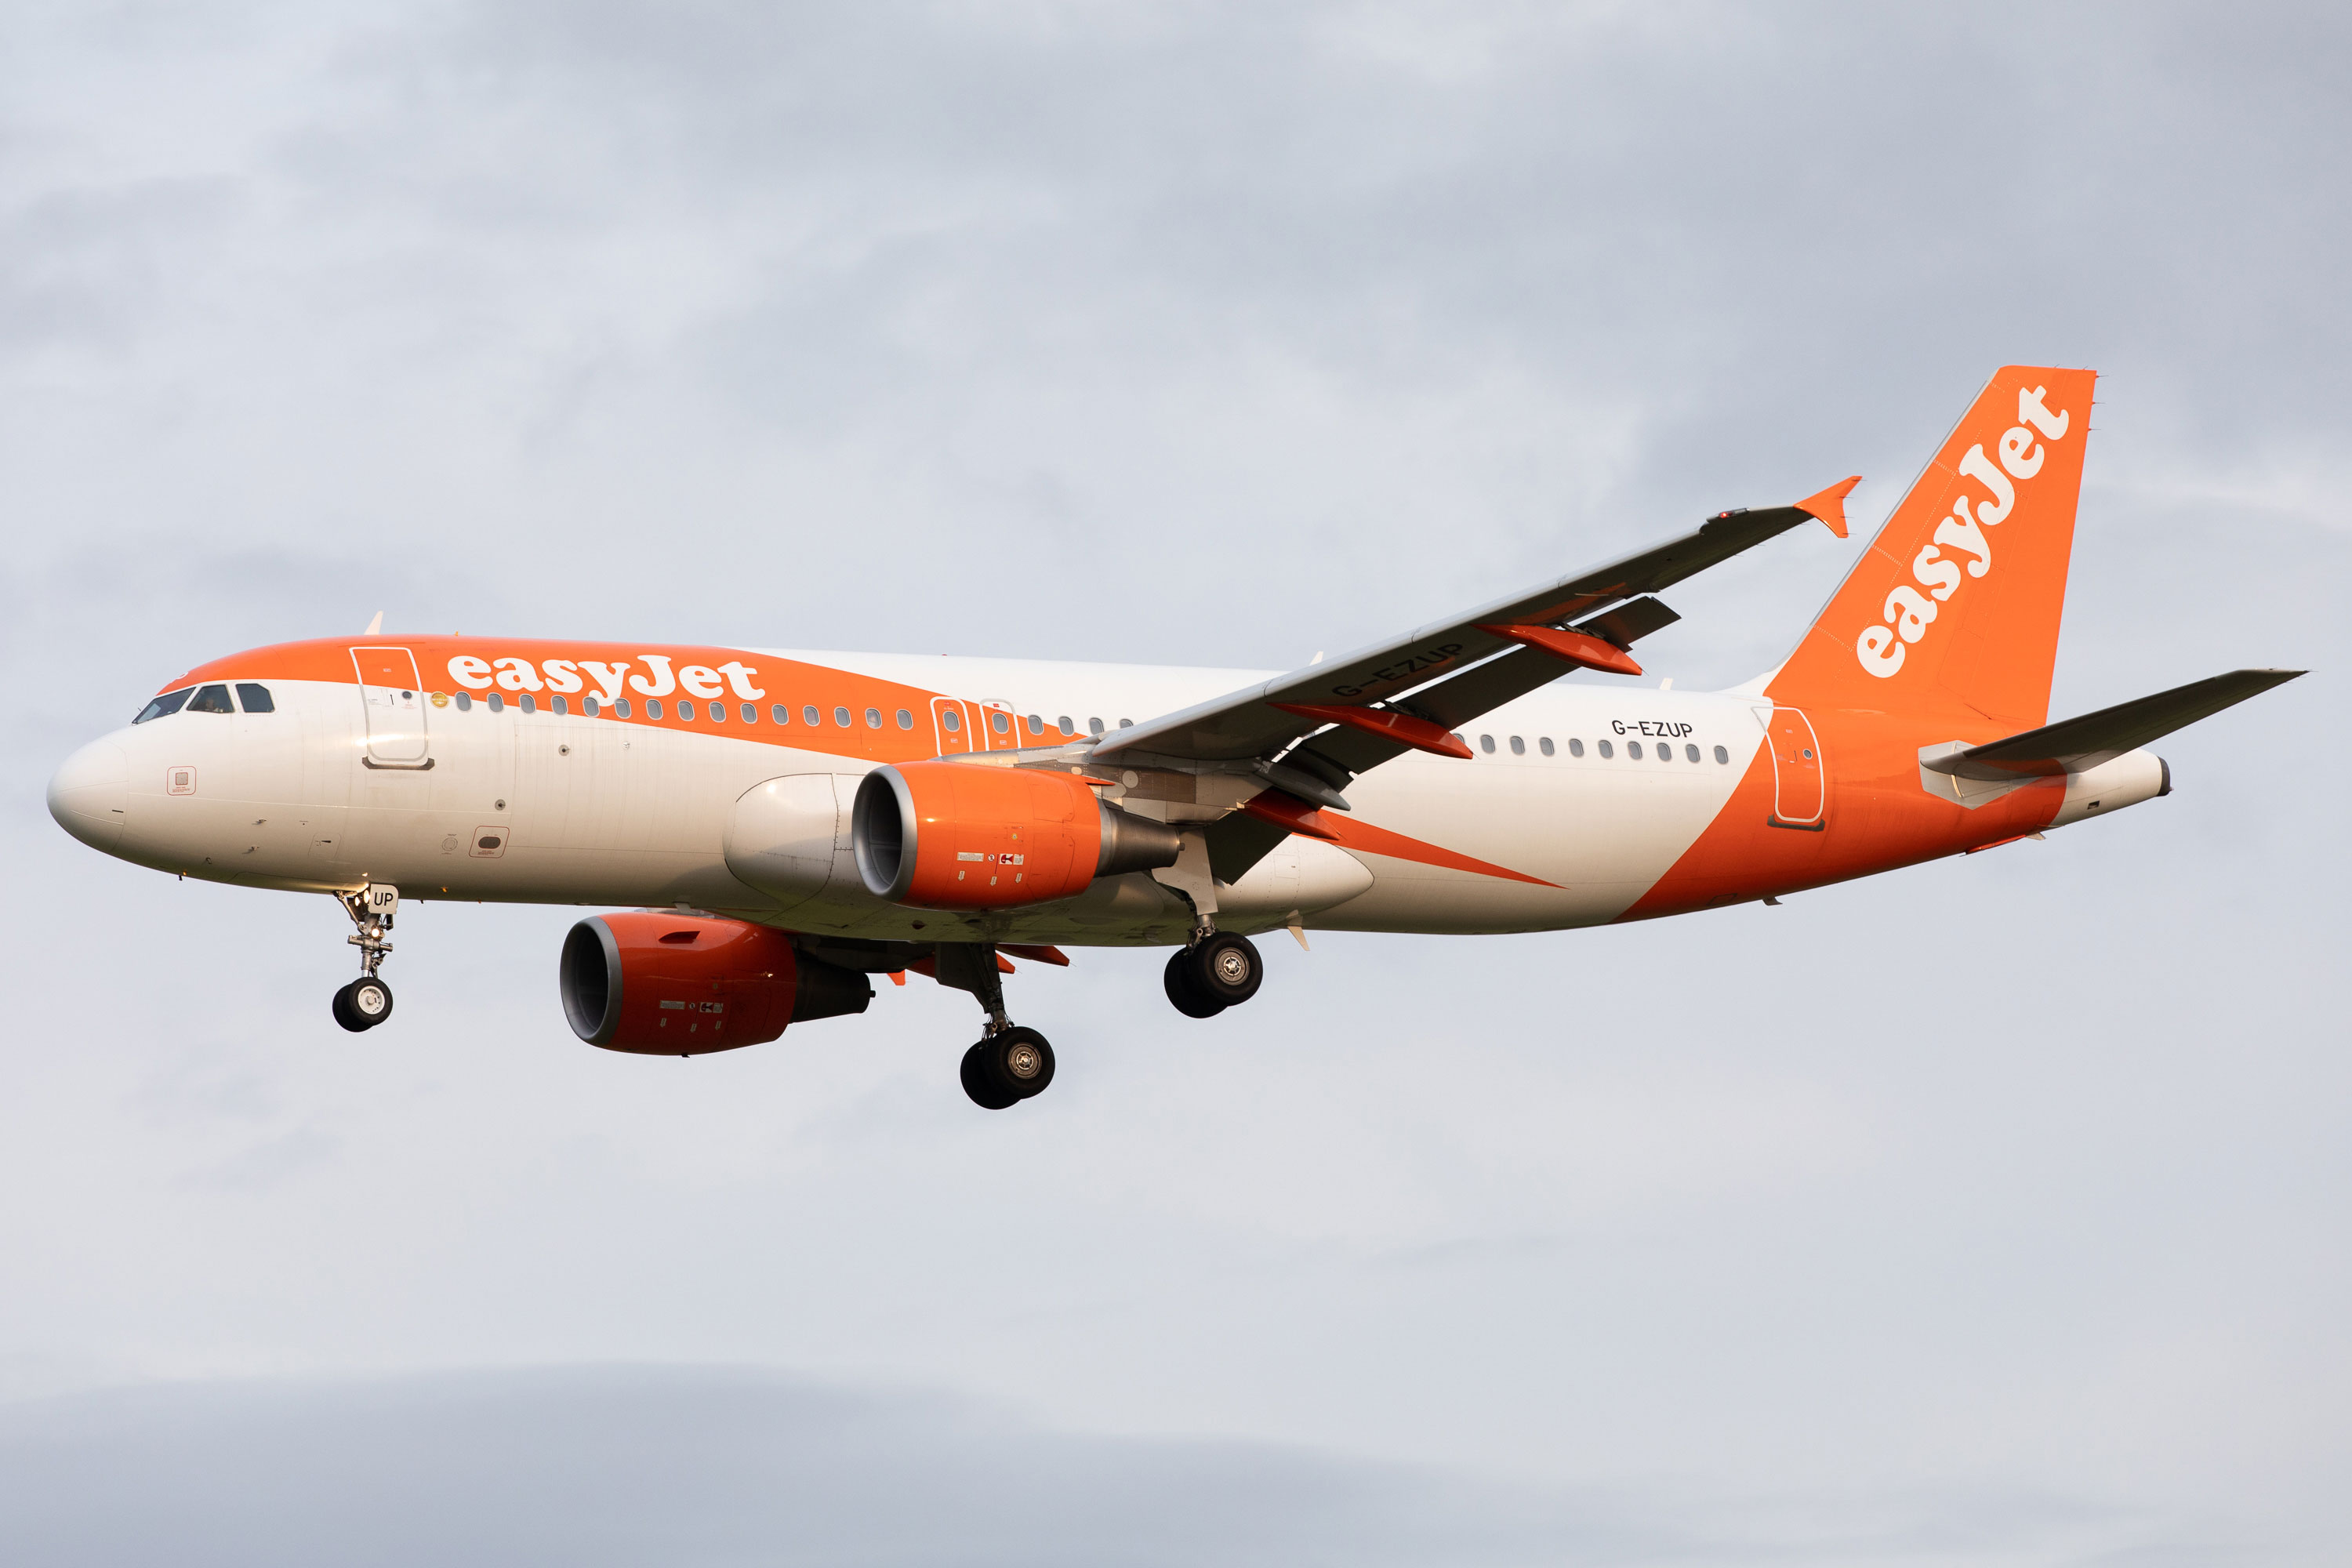 An EasyJet plane lands at Newcastle Airport in England on October 30, 2020.